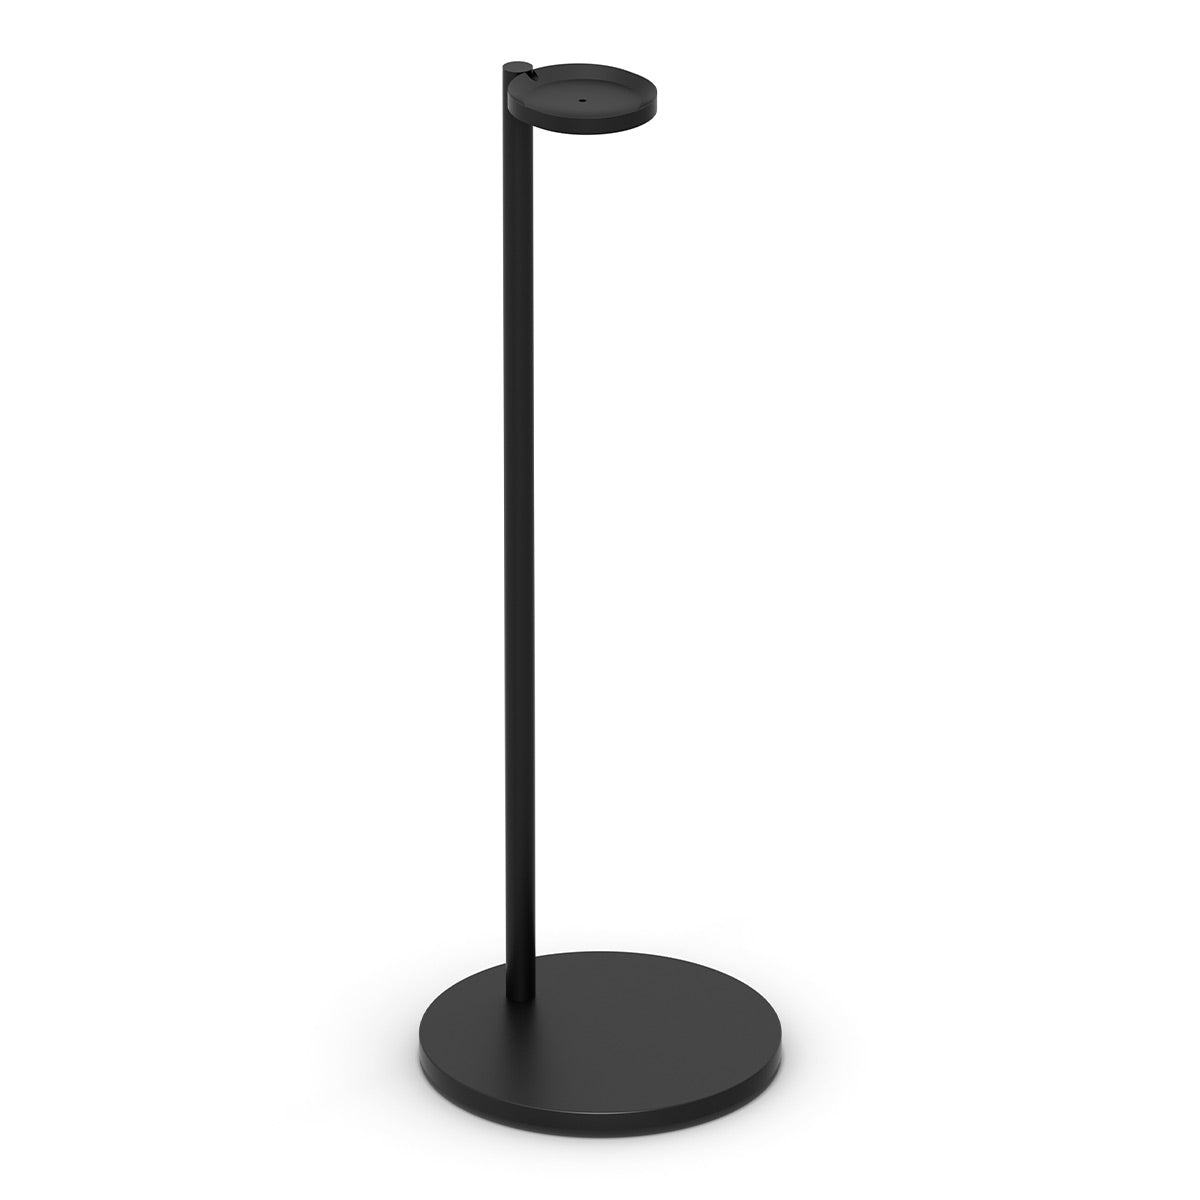 SANUS Launches Speaker Stands and Wall Mounts for Sonos Era 100